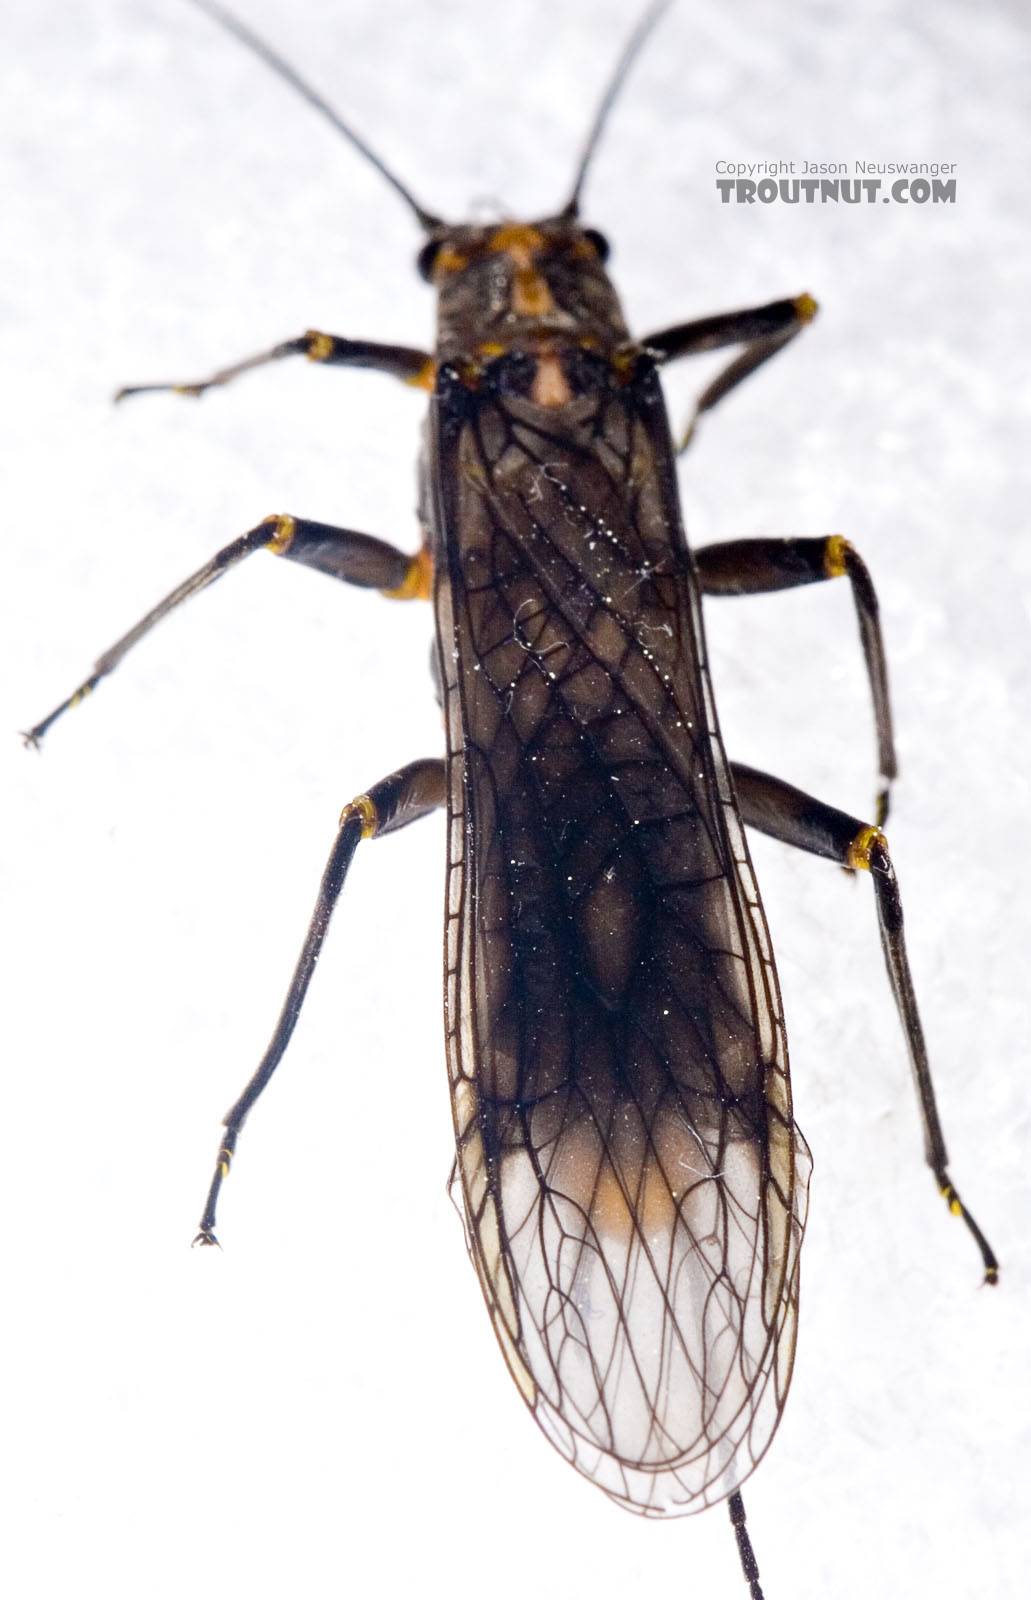 Female Helopicus subvarians (Springfly) Stonefly Adult from the West Branch of the Delaware River in New York